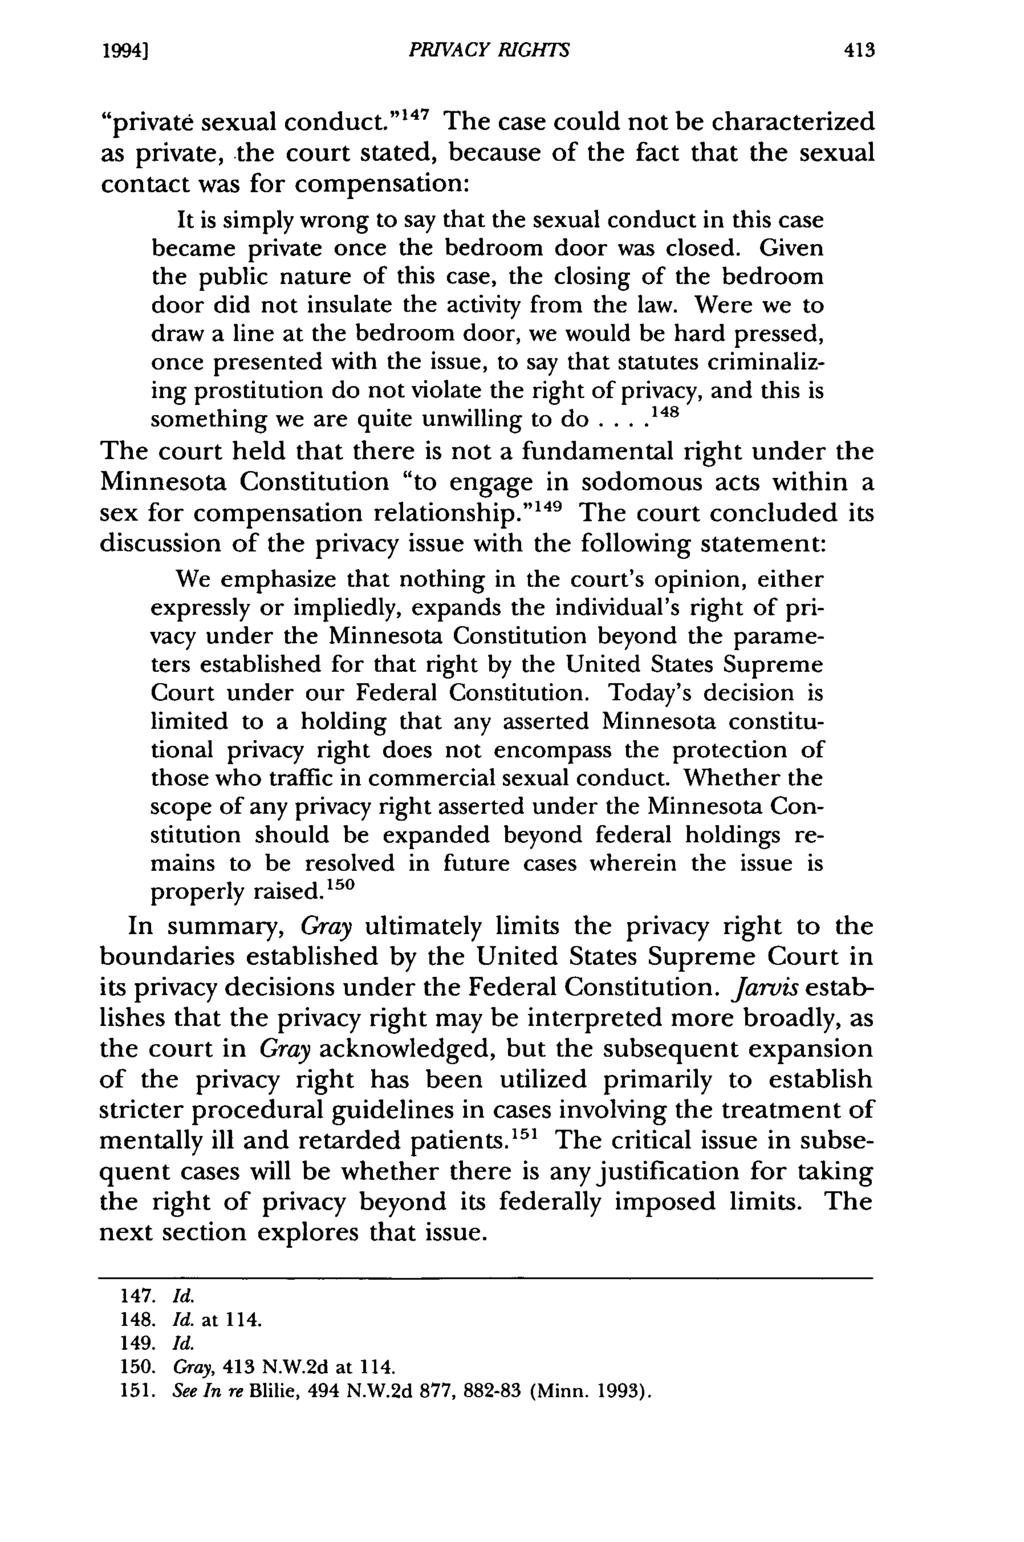 Steenson: Fundamental Rights in the "Gray" Area: The Right of Privacy under Published